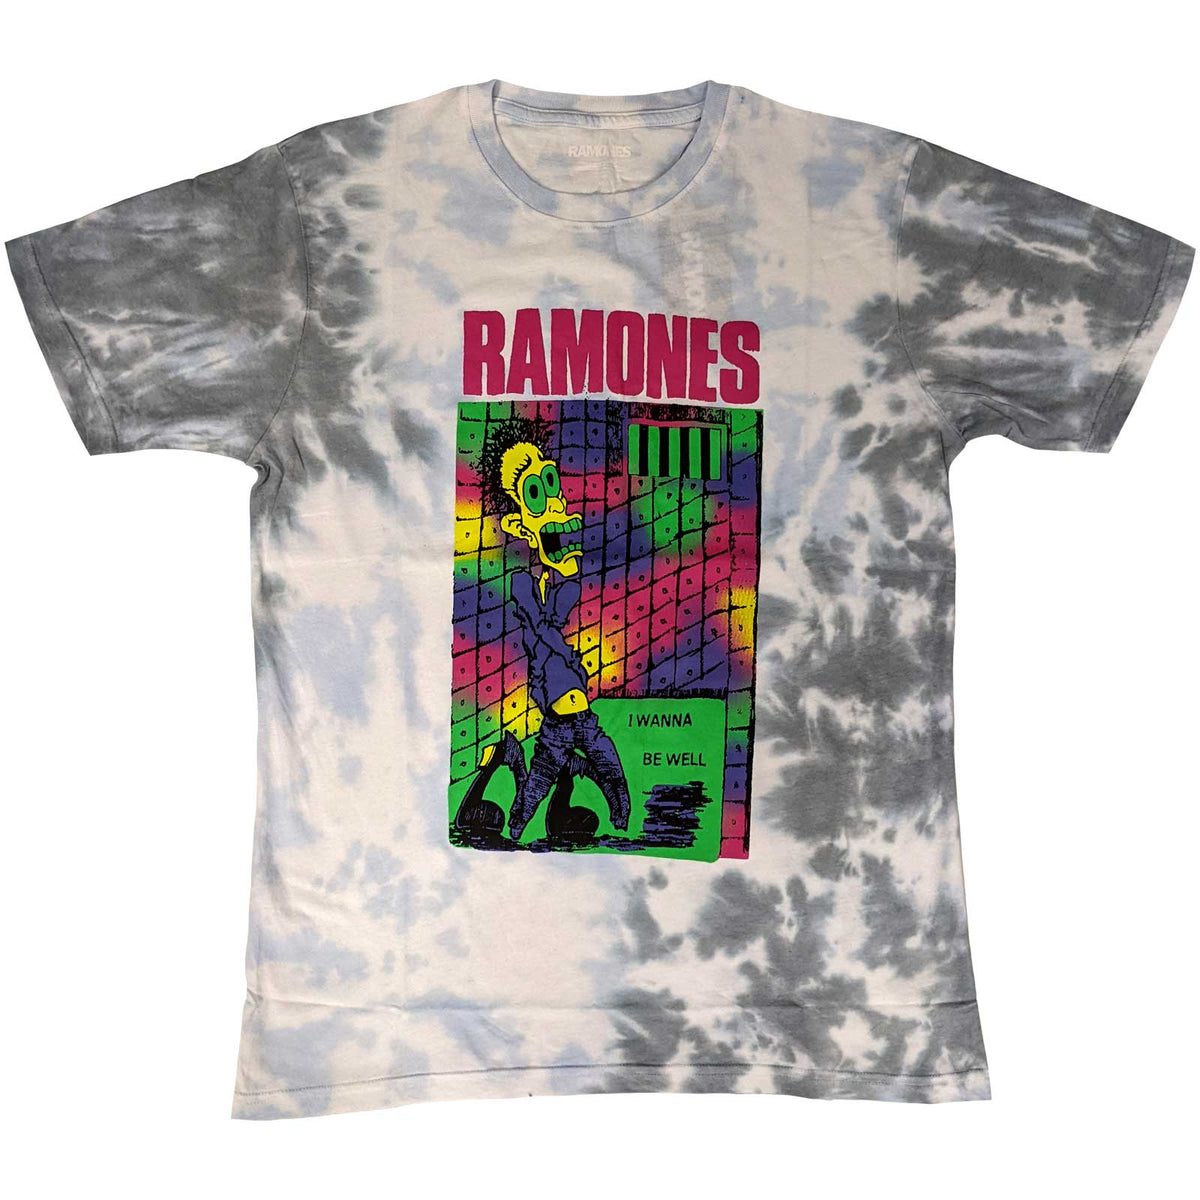 The Ramones Unisex T-Shirt - Escapeny (Wash Collection)  - Official Licensed Design